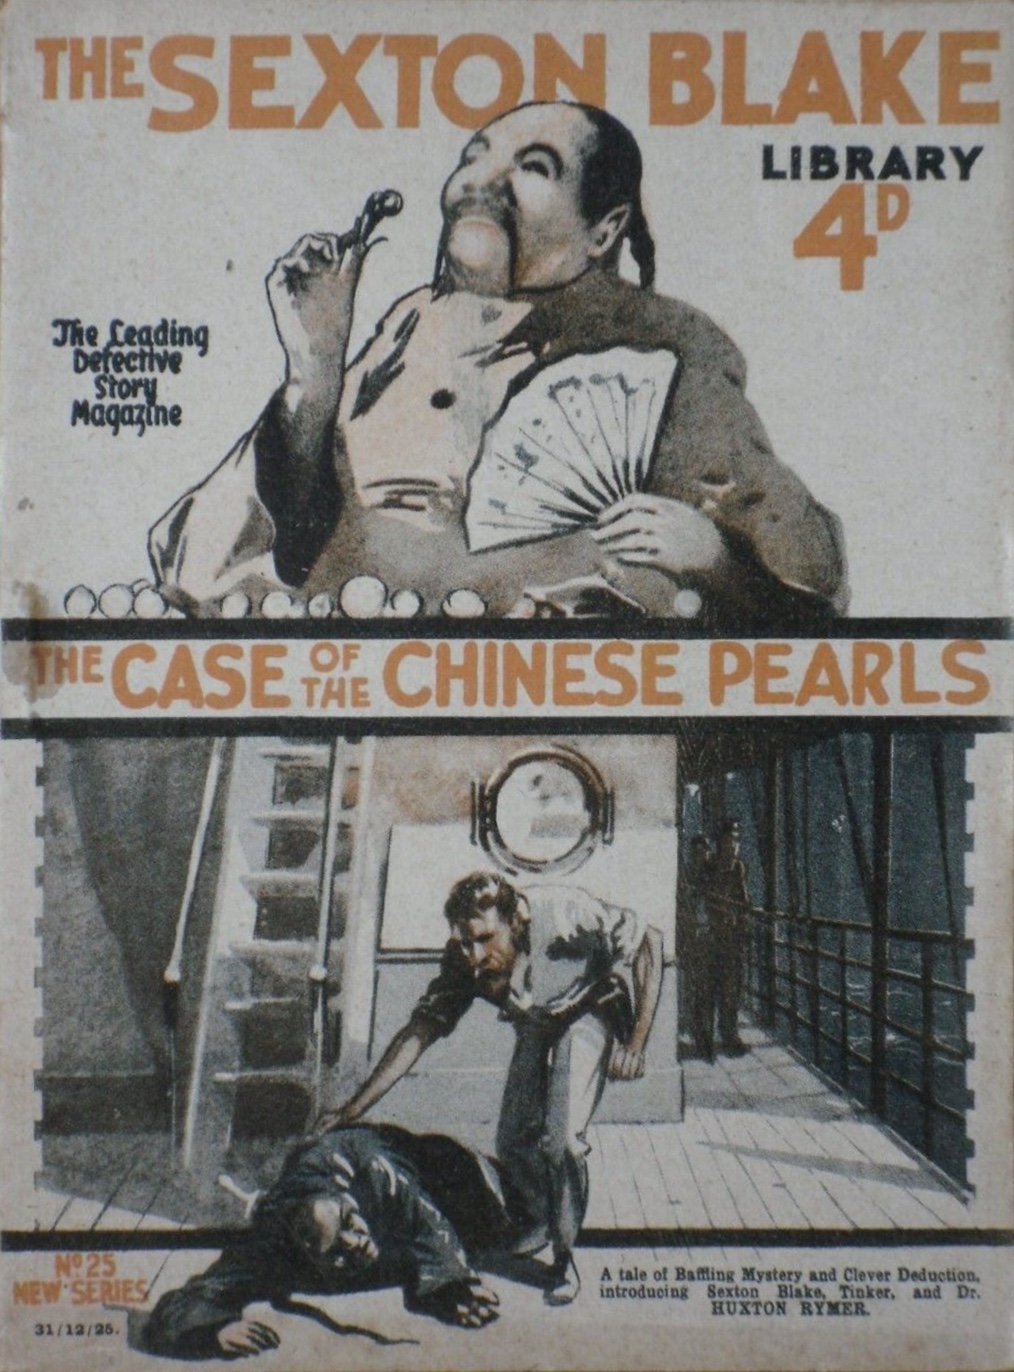 THE CASE OF THE CHINESE PEARLS